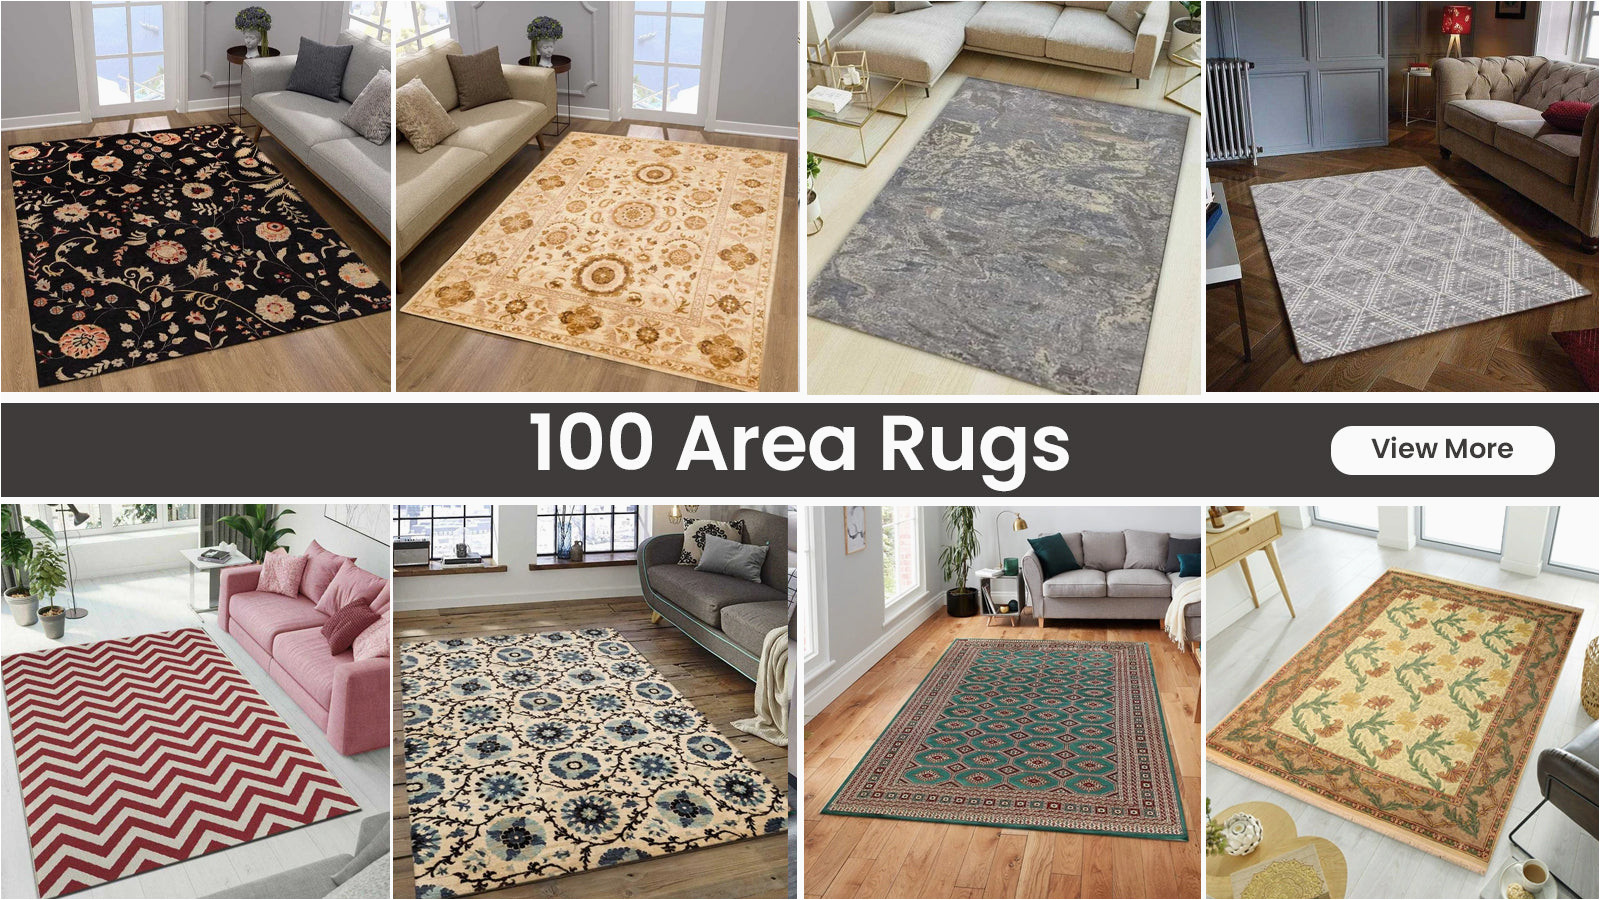 Places to Buy area Rugs Near Me 18 Best Rug Stores In Washington Dc ,virginia & Maryland – Rugknots